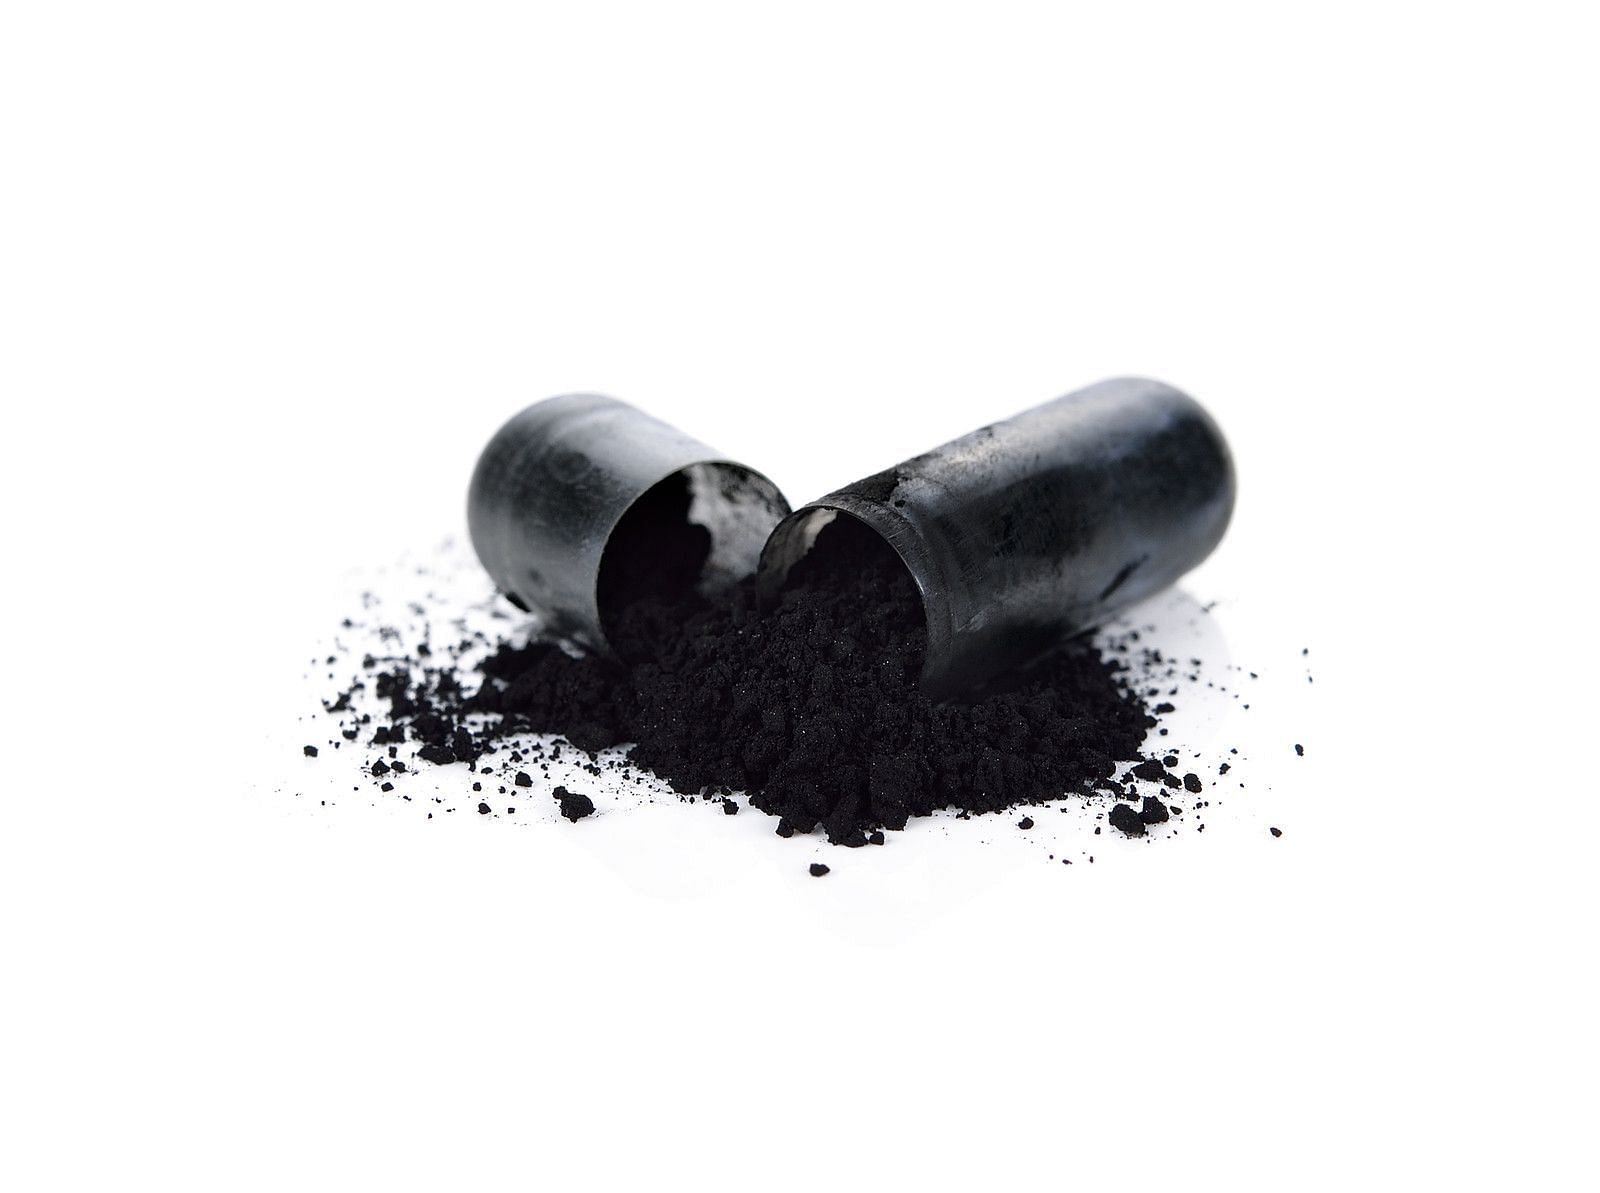 Activated charcoal is a porous black powder, used in emergency rooms in cases of overdose (Image via Flickr)